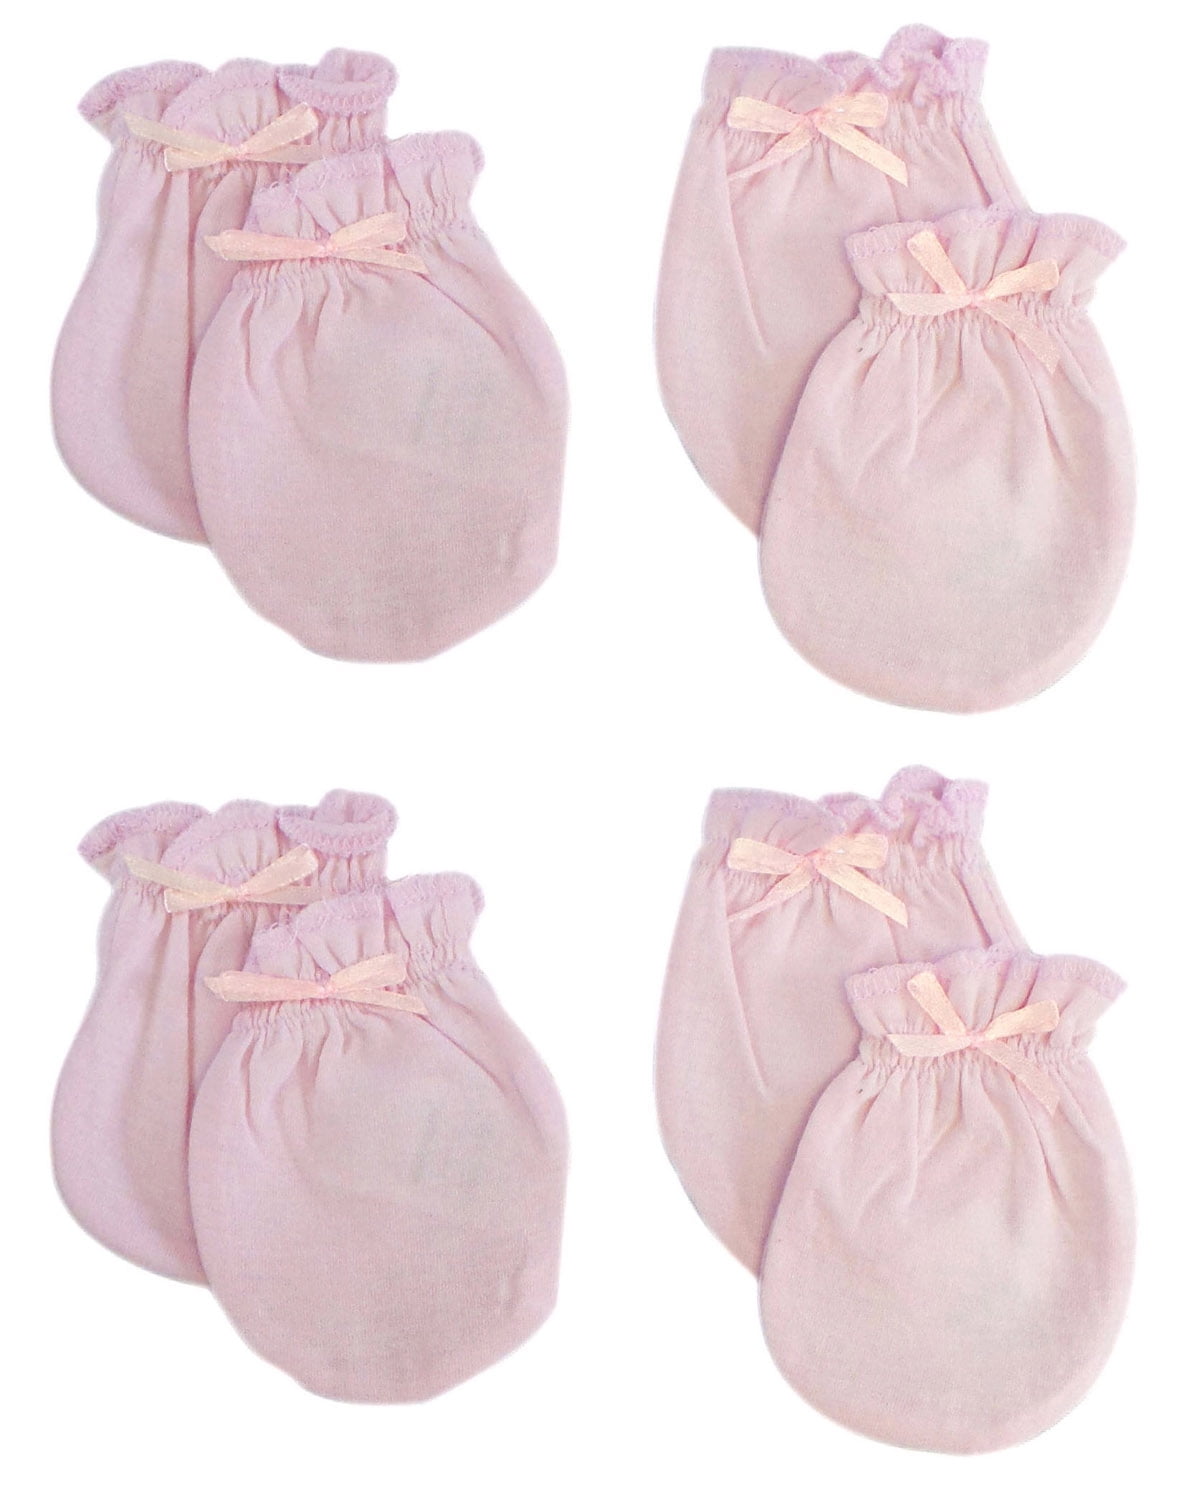 Infant Mittens, Pink - Pack Of 4